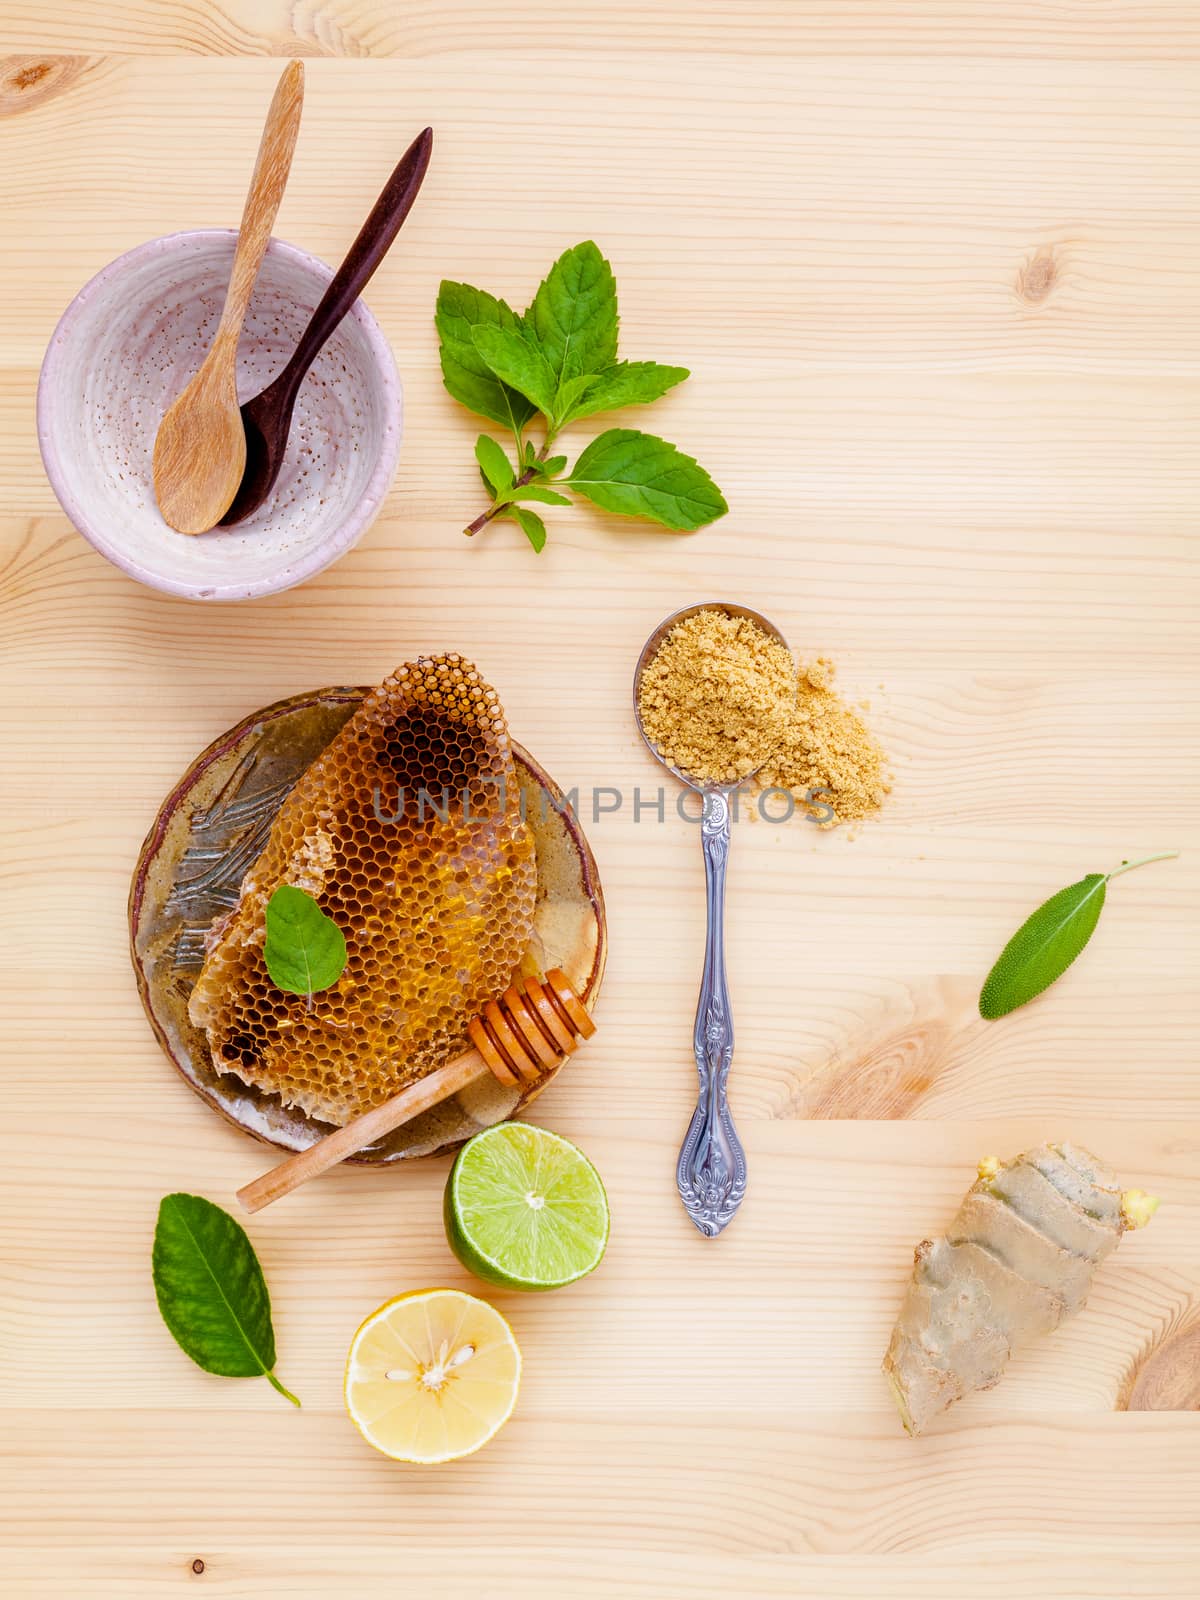 Honeycomb in wooden bowl with herbs mint ,thyme and sage set up on white wooden background.